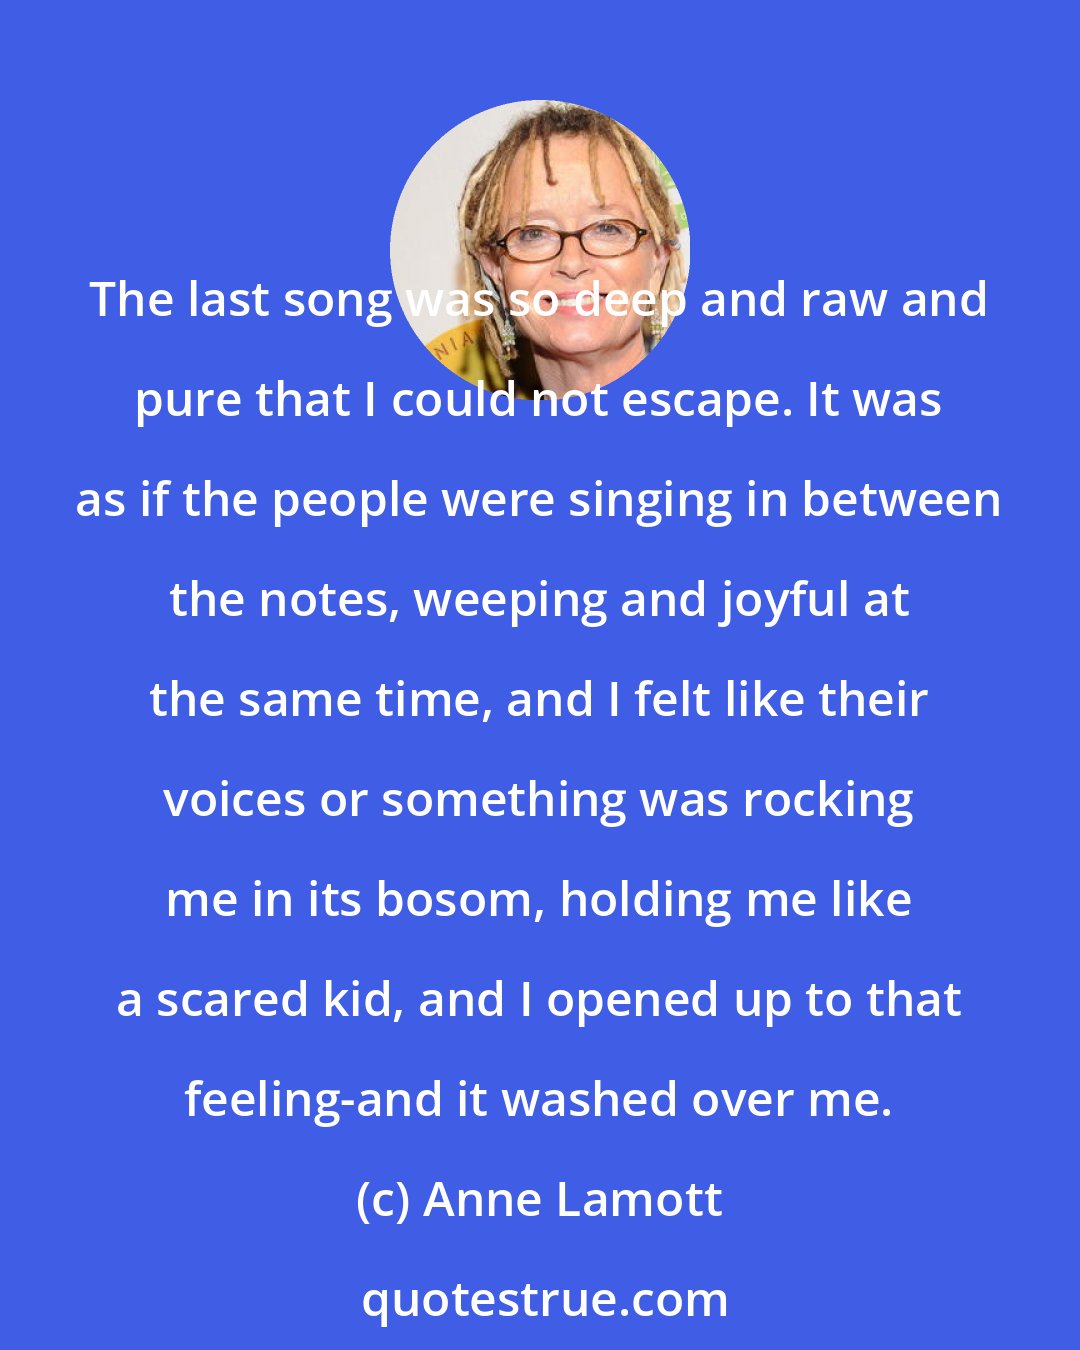 Anne Lamott: The last song was so deep and raw and pure that I could not escape. It was as if the people were singing in between the notes, weeping and joyful at the same time, and I felt like their voices or something was rocking me in its bosom, holding me like a scared kid, and I opened up to that feeling-and it washed over me.